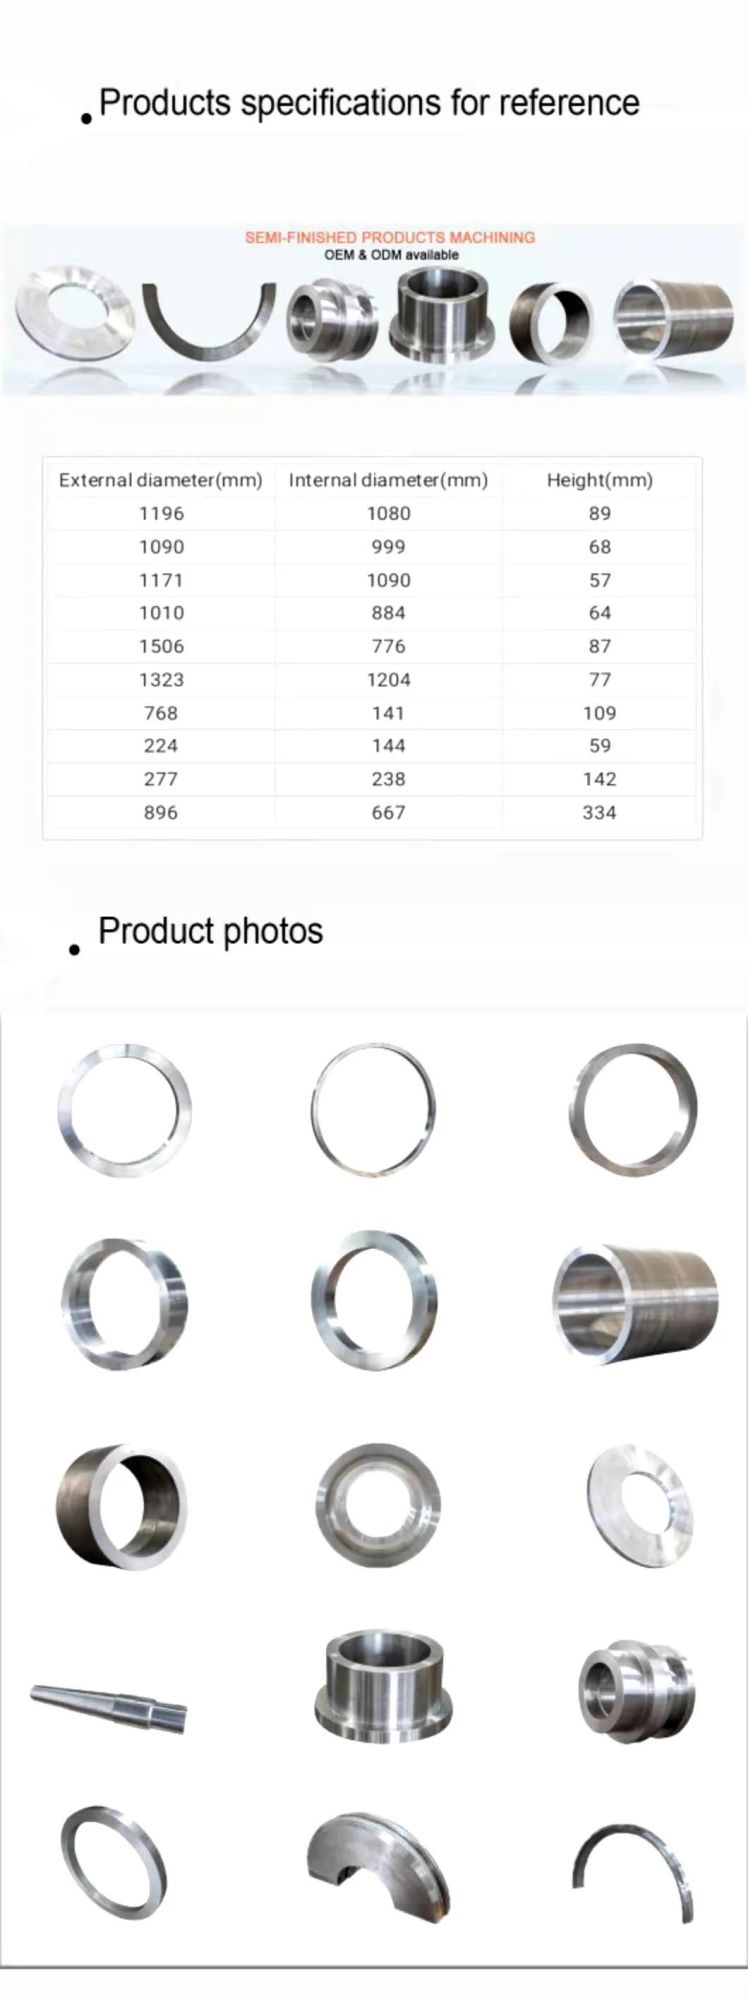 Hot Forging Blank, Mechanical Parts and Complete Sets of Equipment